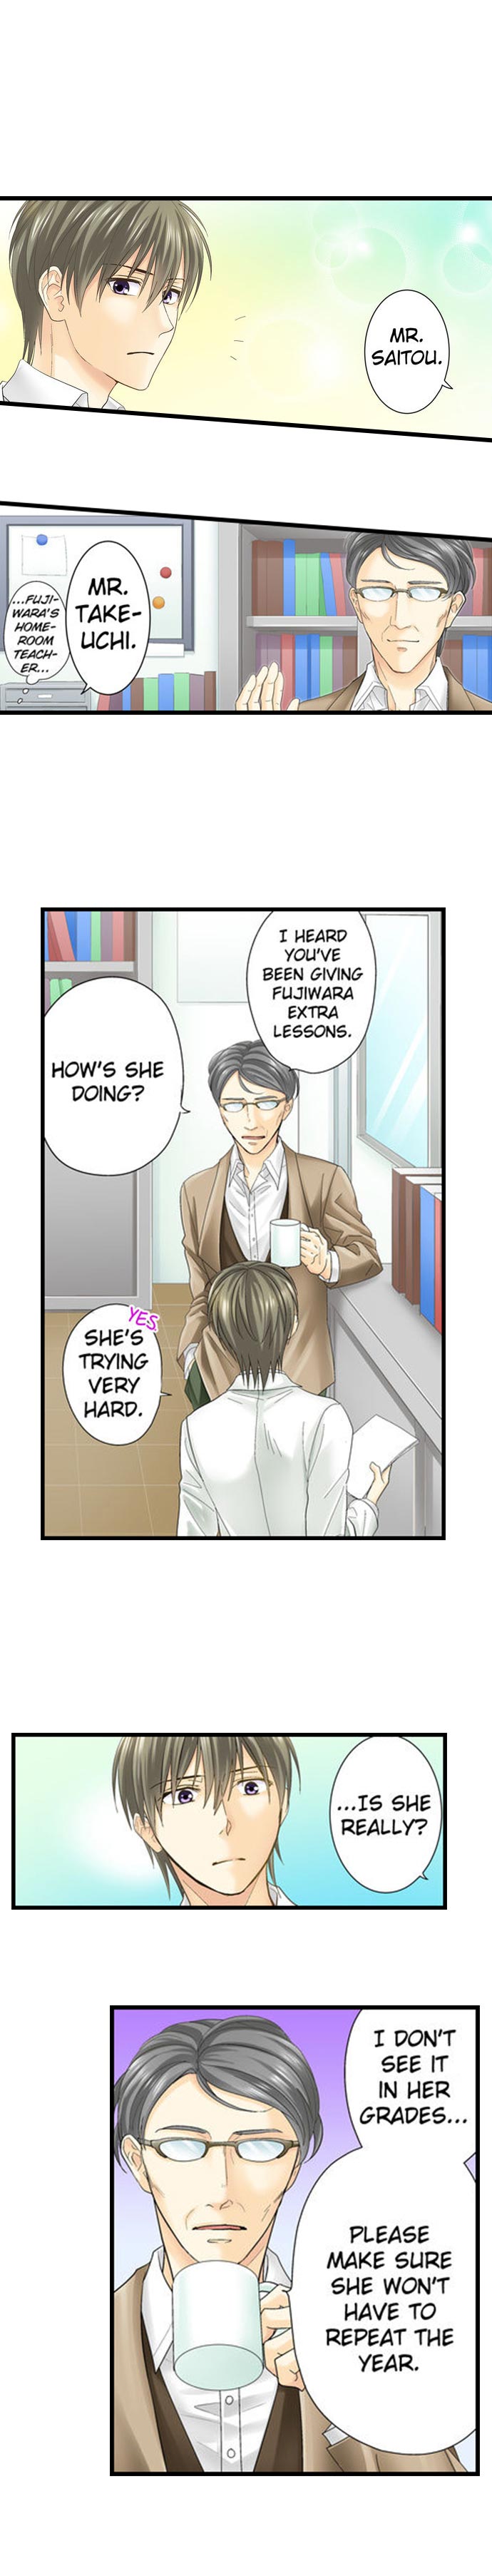 Running a Love Hotel with My Math Teacher - Chapter 7 Page 3